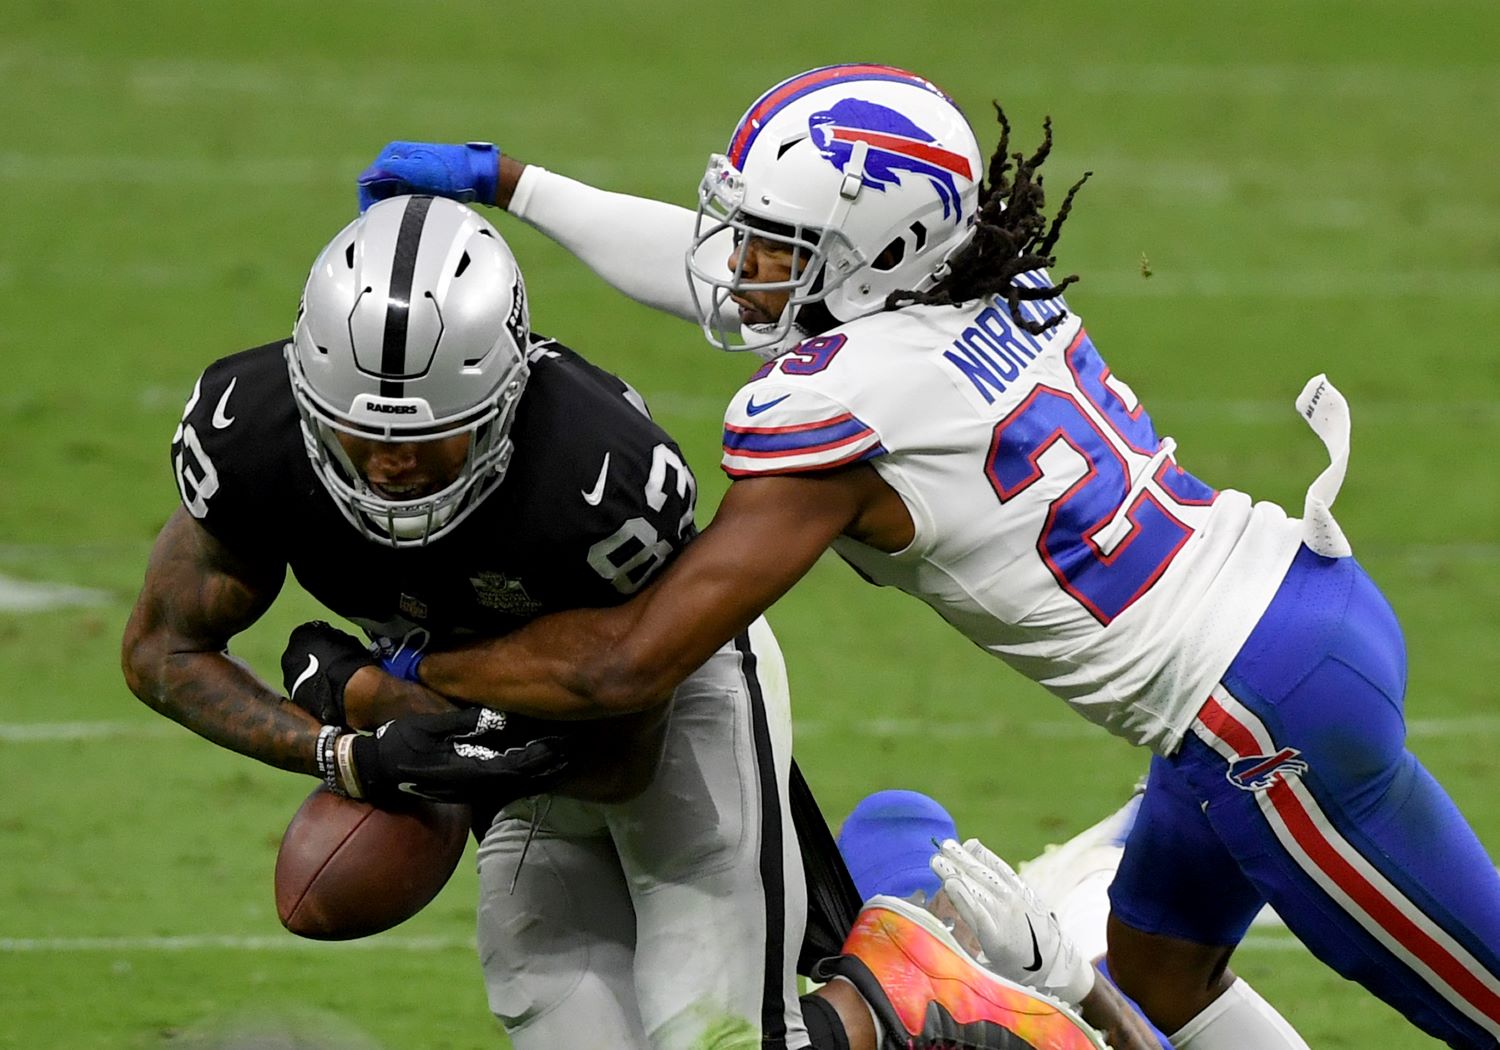 With cornerback Josh Norman testing positive for COVID-19, the Buffalo Bills will have a difficult time slowing down the Cardinals on Sunday.